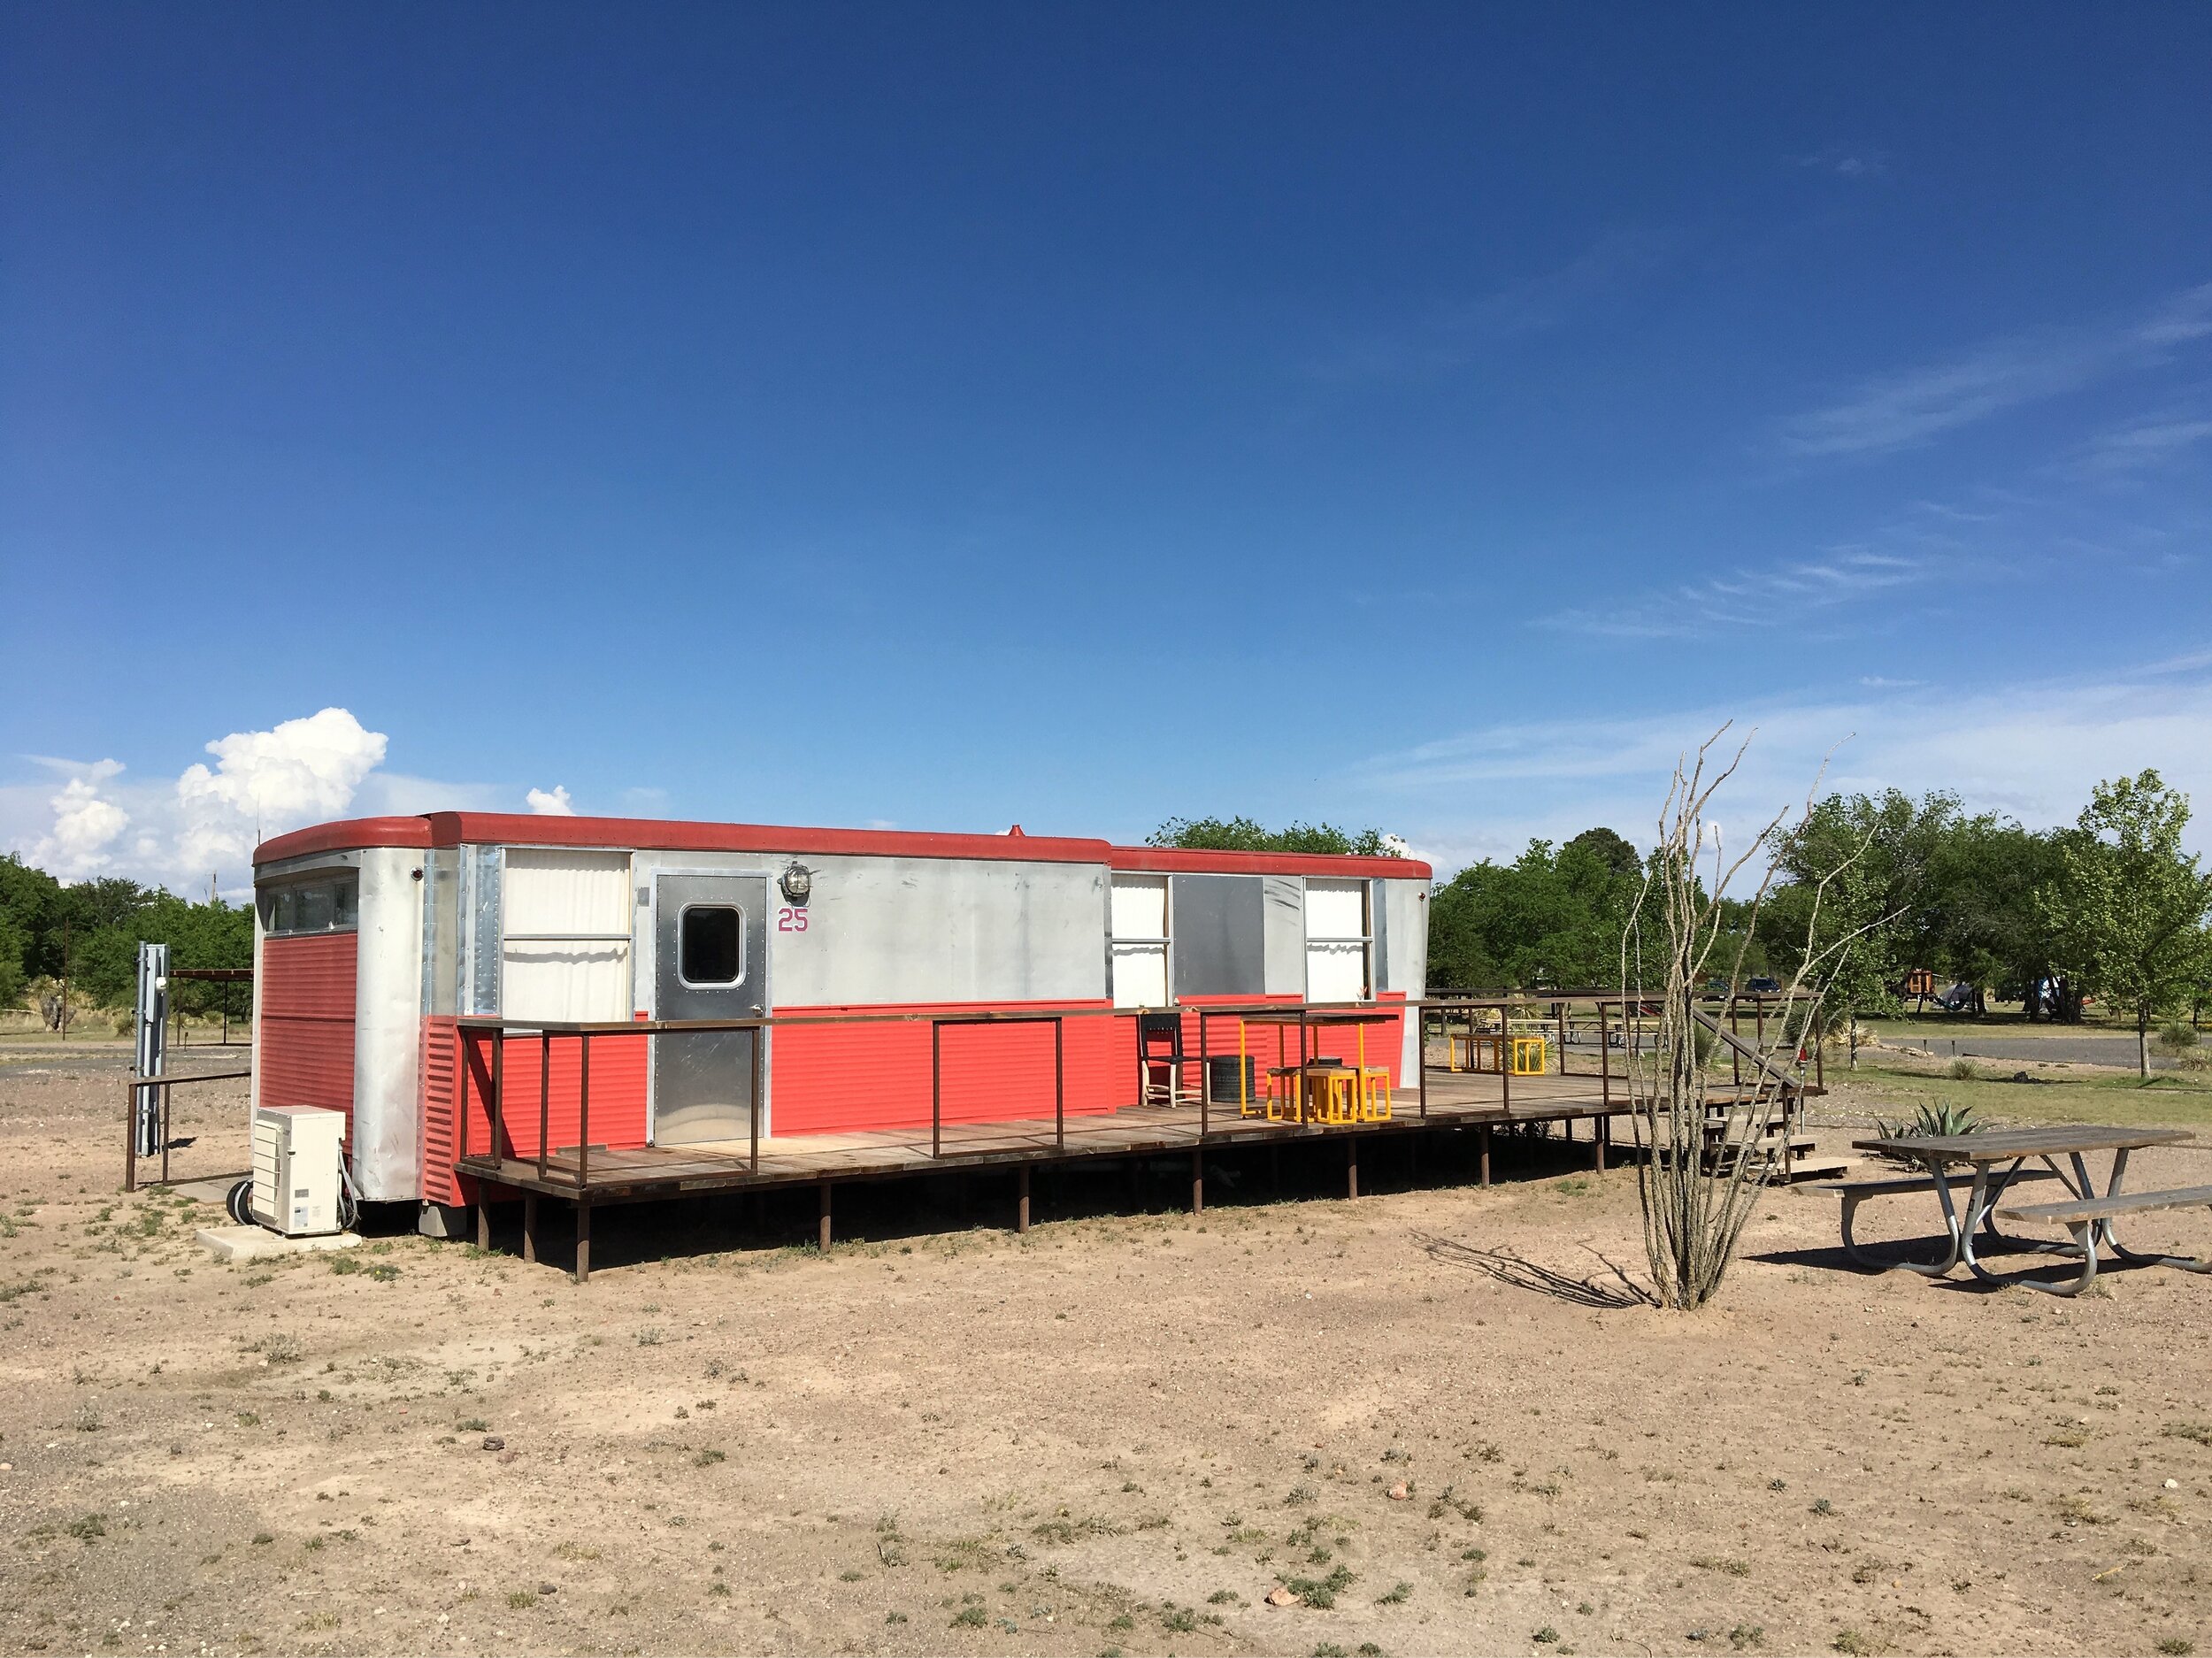 Accommodations in Marfa